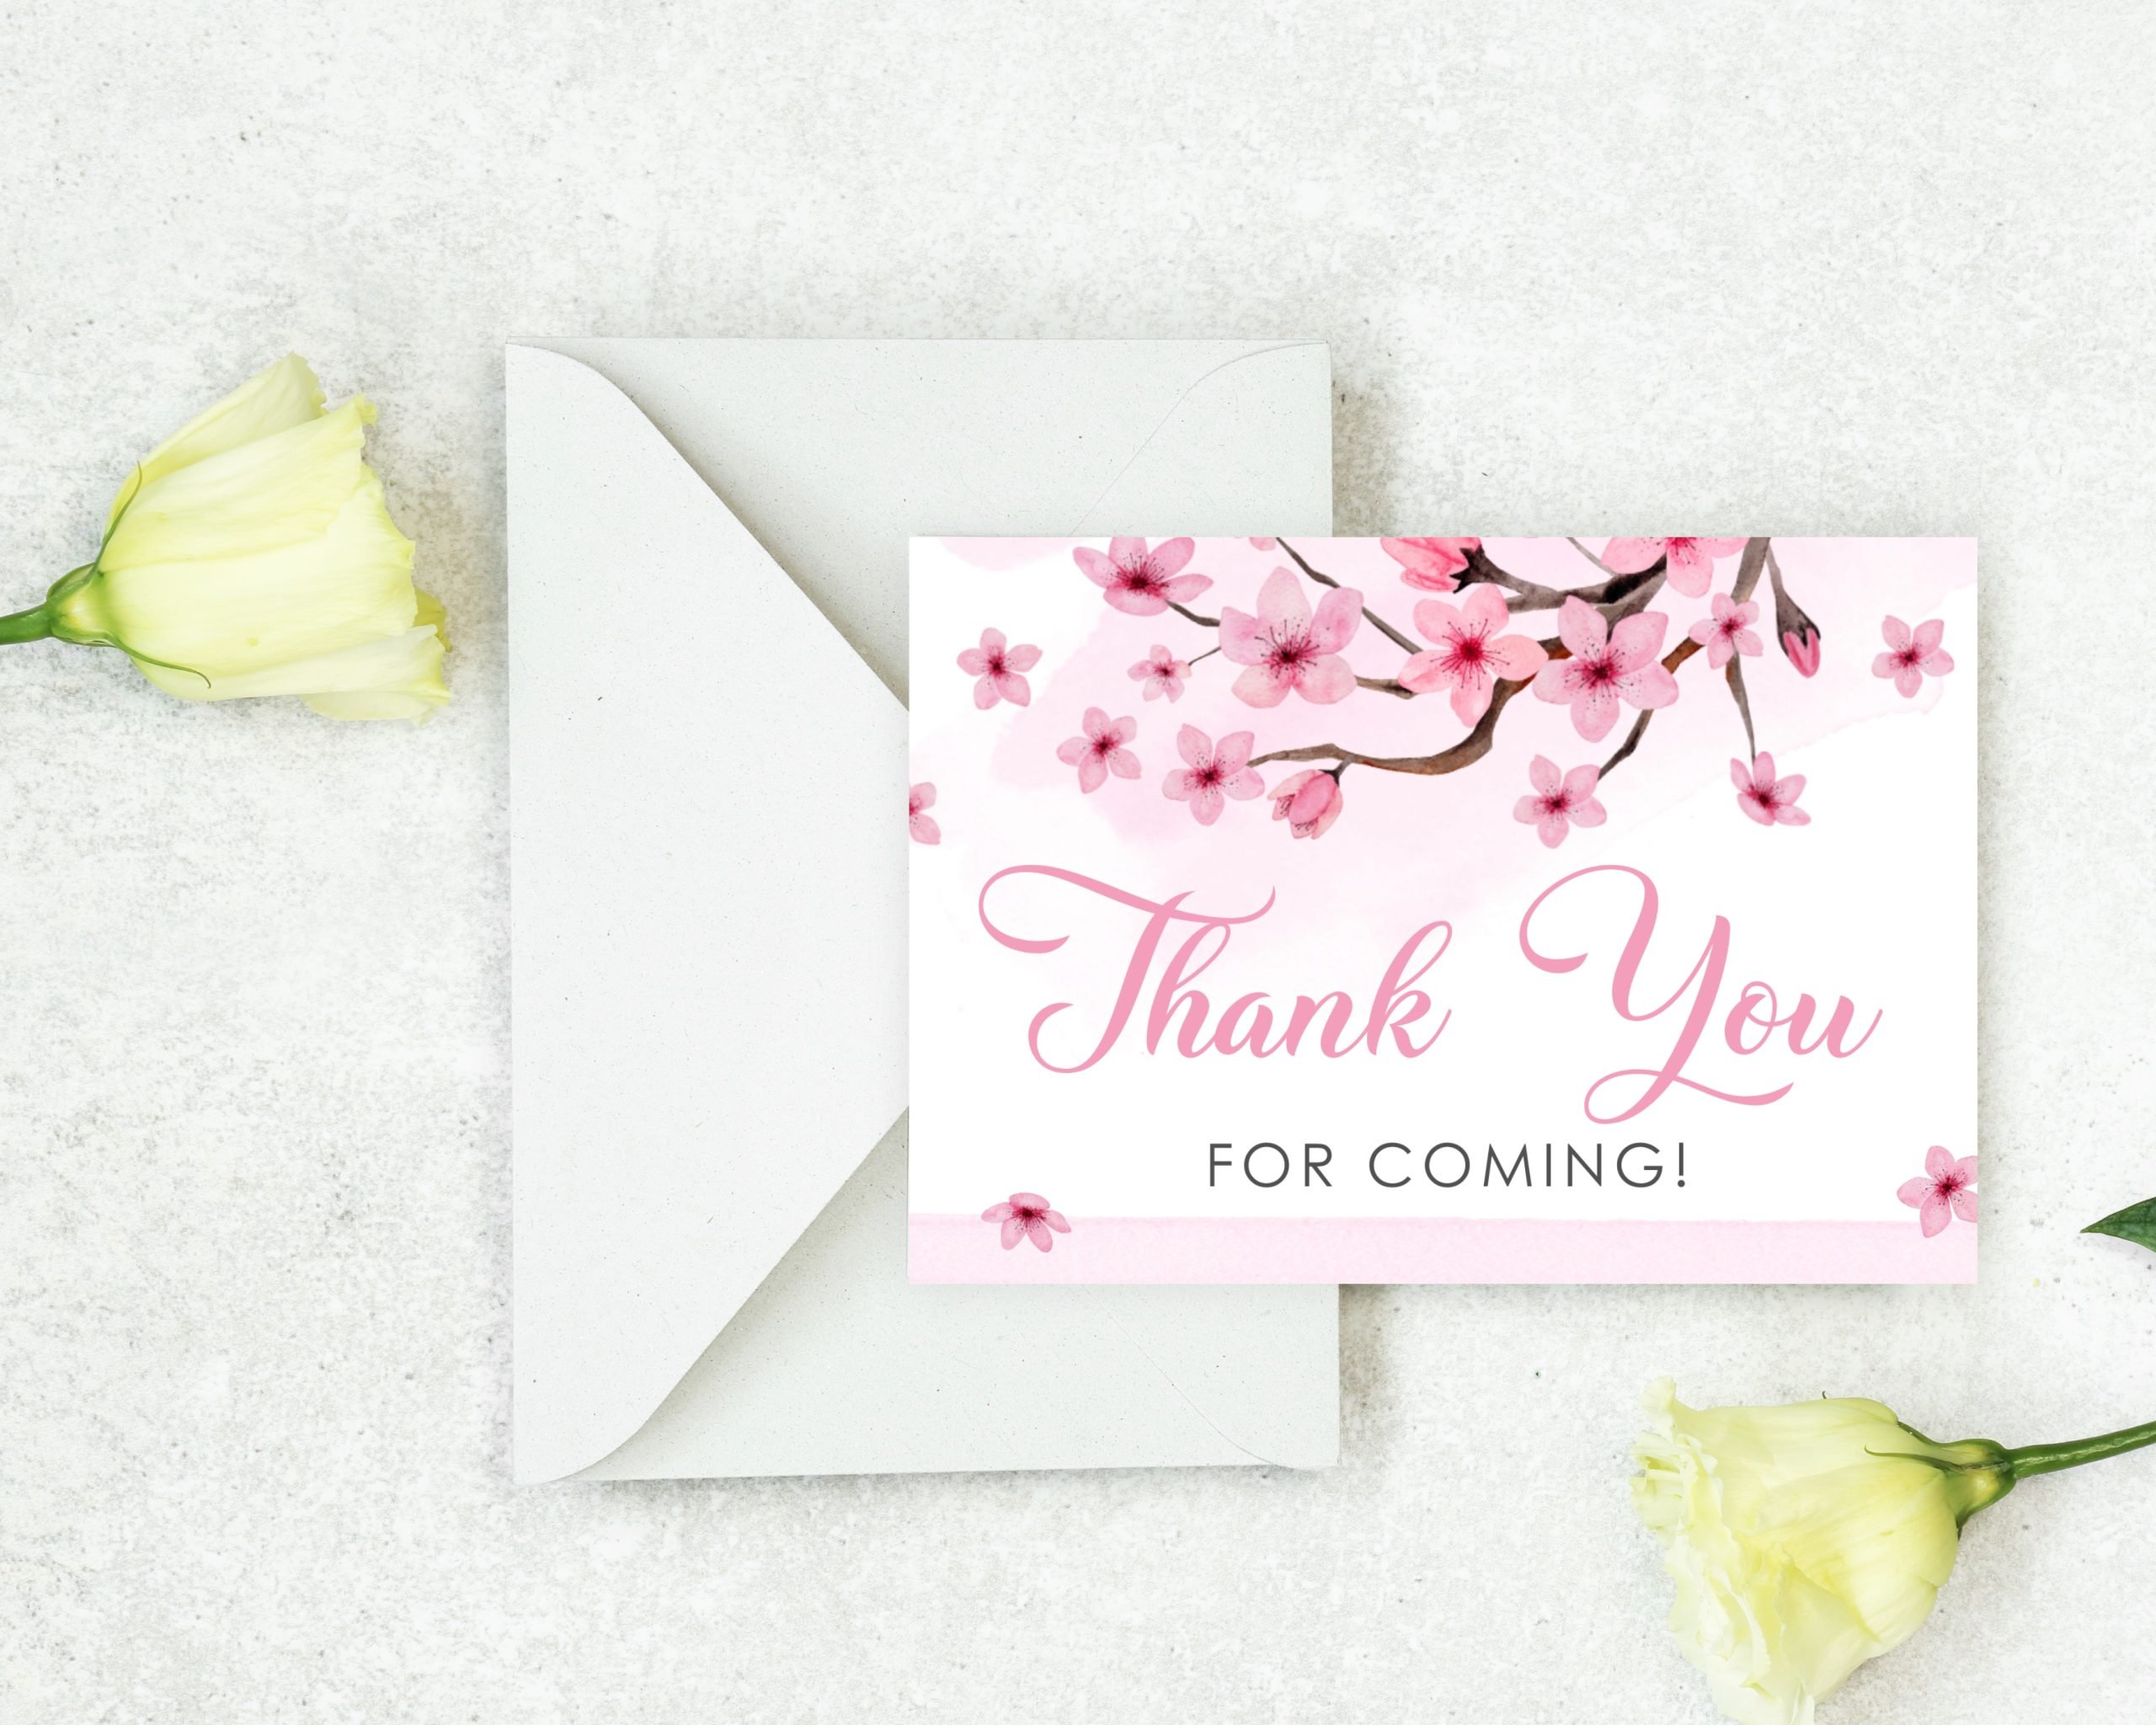 BABY SHOWER Editable Cherry Blossom Baby Shower Invitation Set – Pink Floral Diaper Raffle, Thank You Card, Books for Baby – Corjl Template Baby Shower Printables.